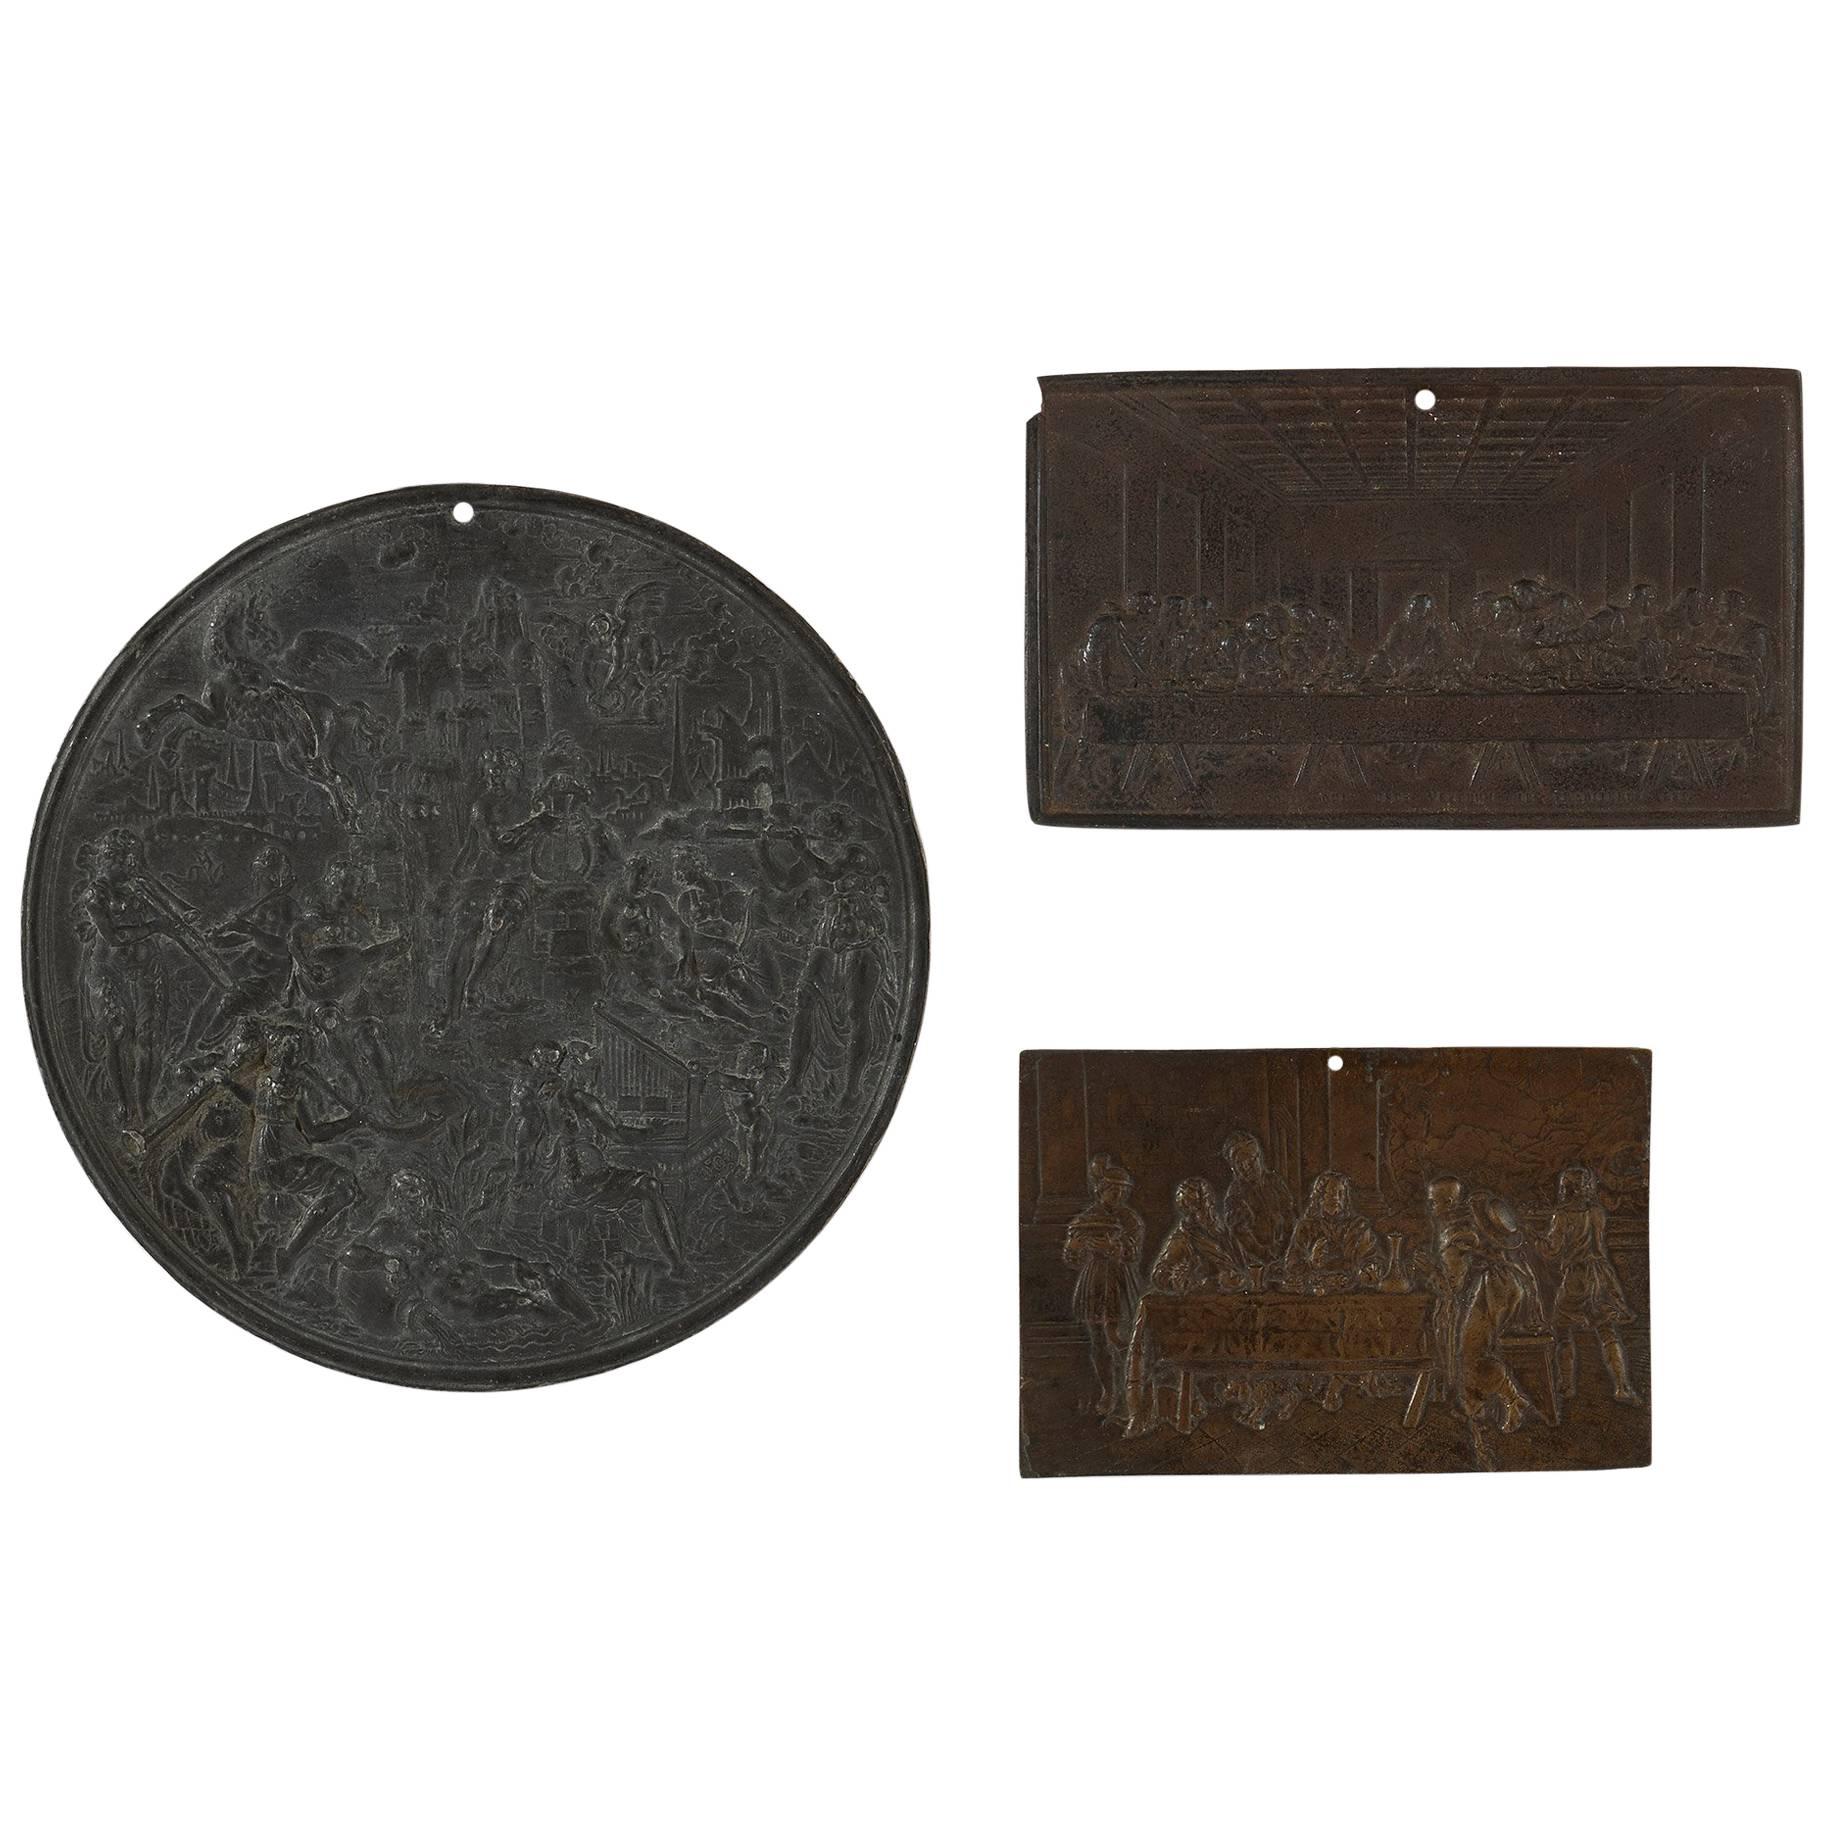 Three German Antique Iron Plaques Cast in the Renaissance Style